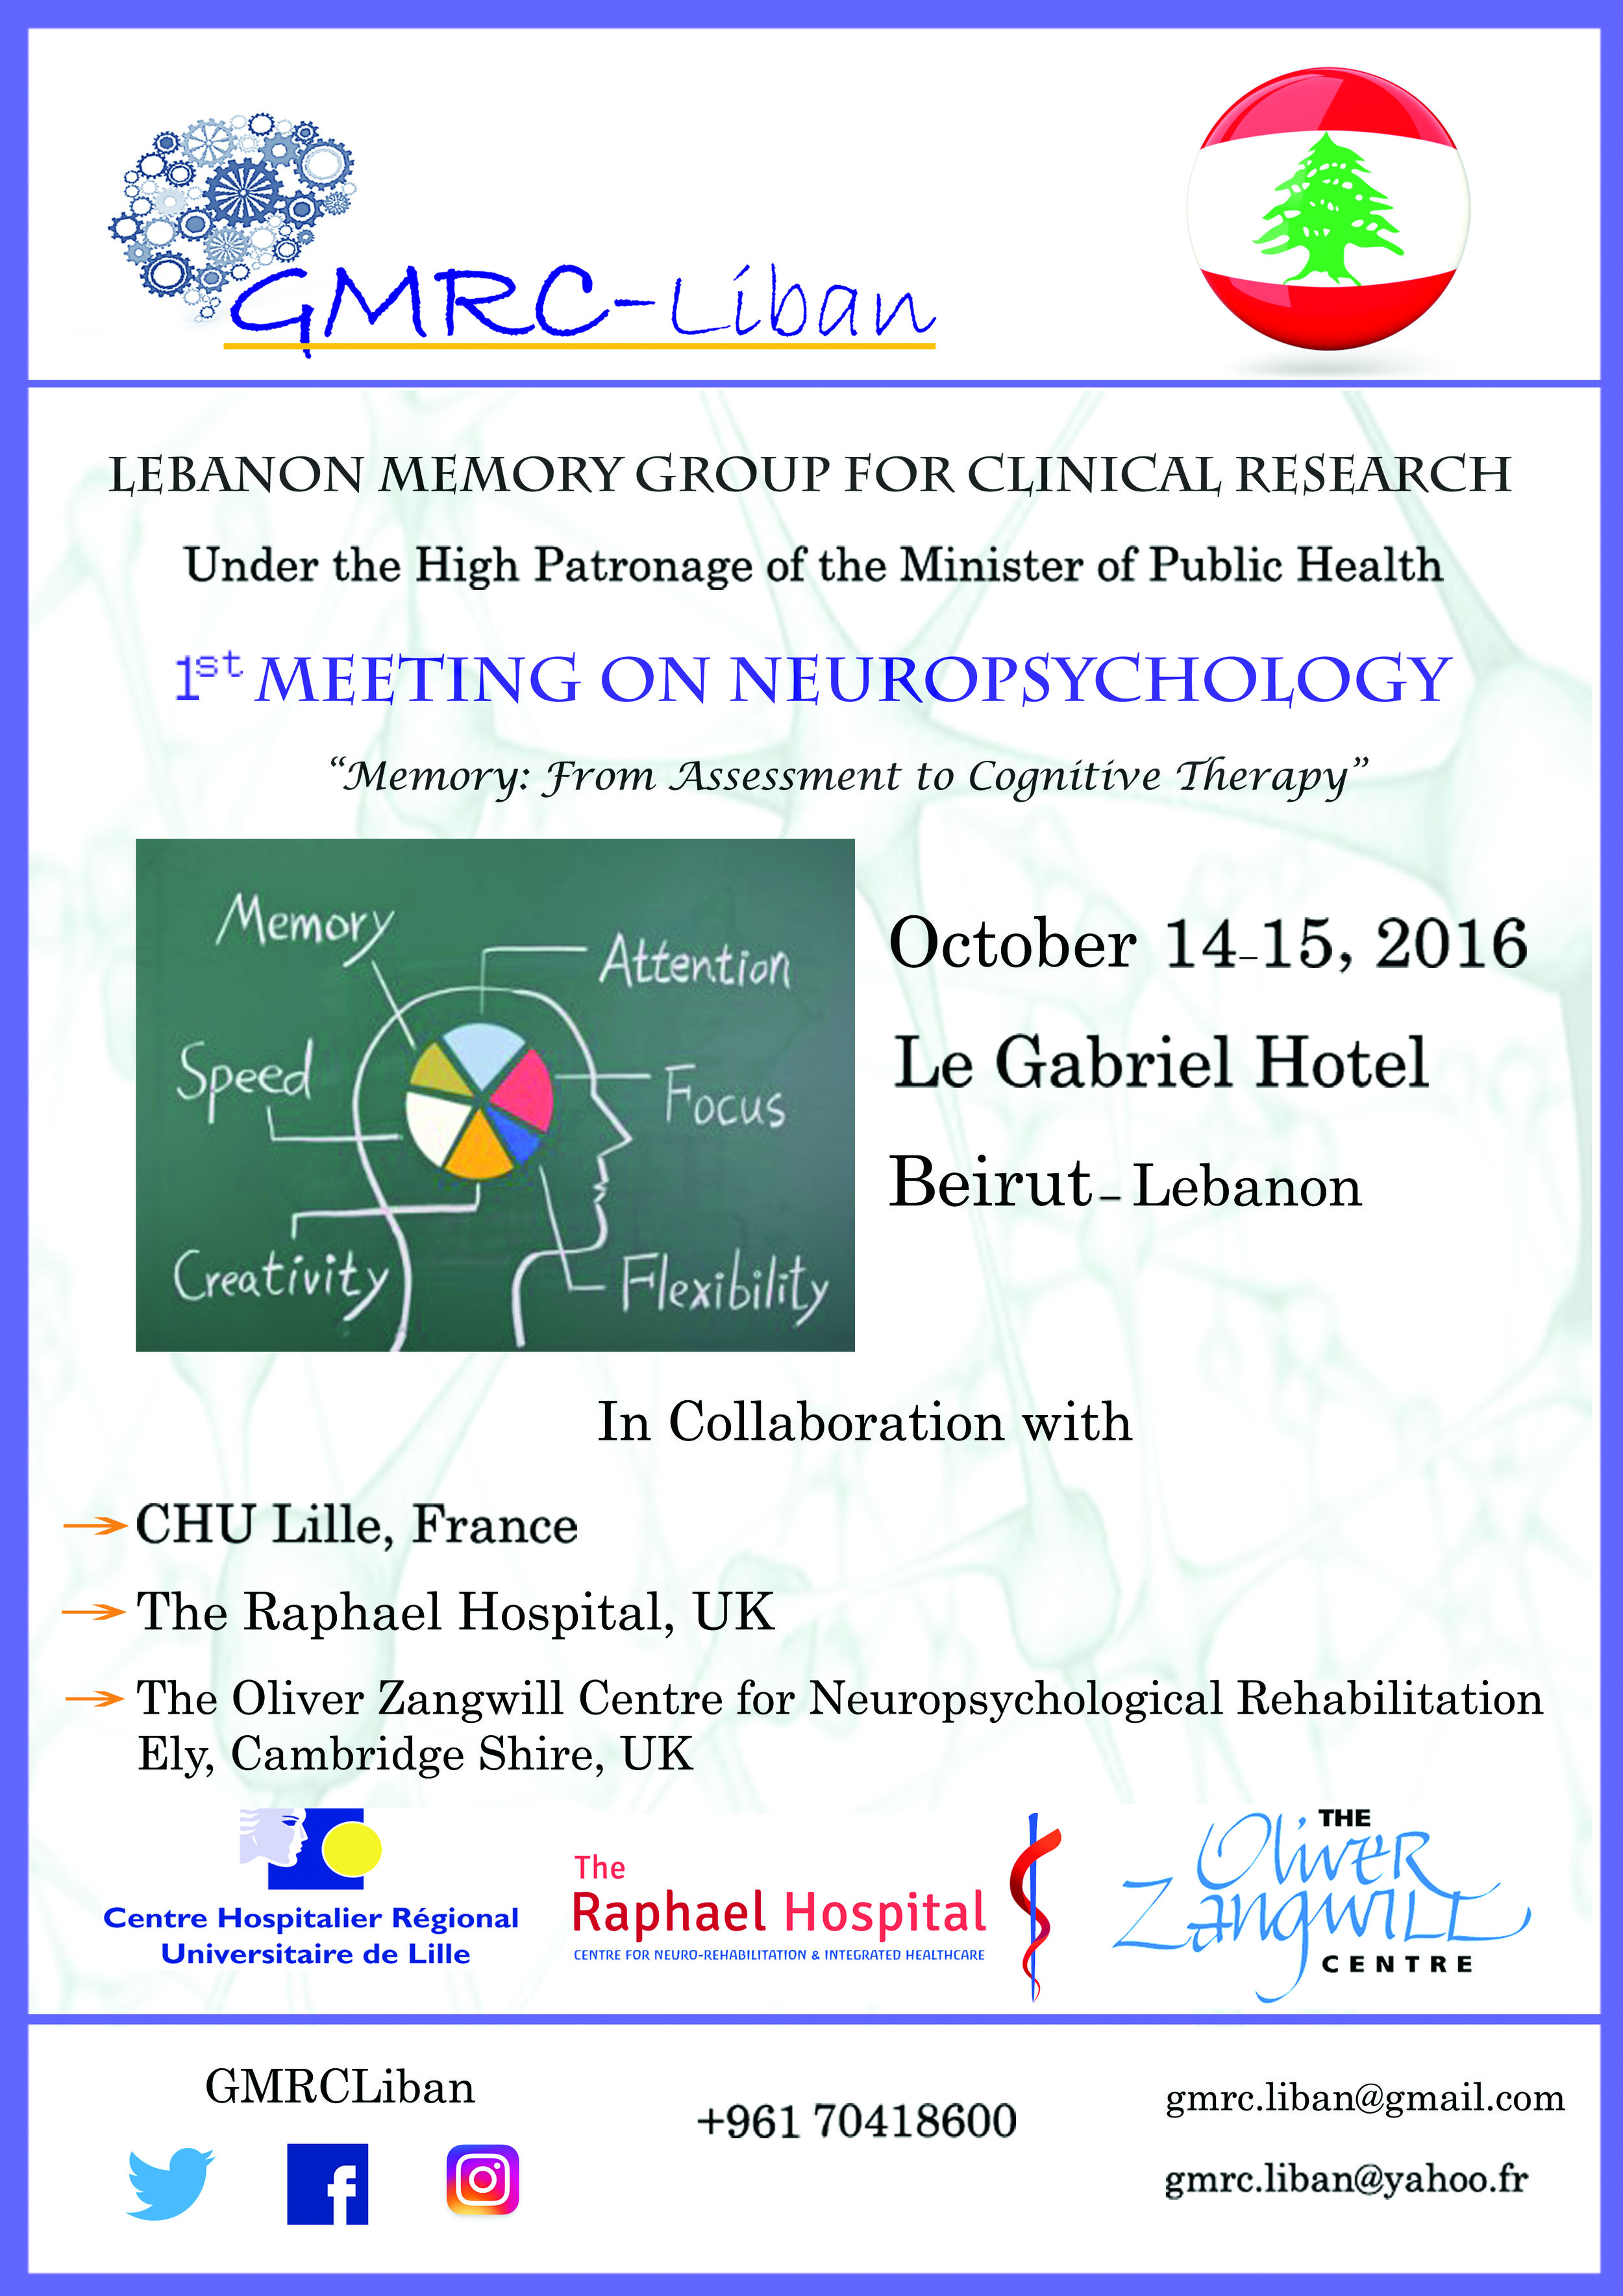 1st Meeting - “Memory: From Assessment to Cognitive Therapy ”